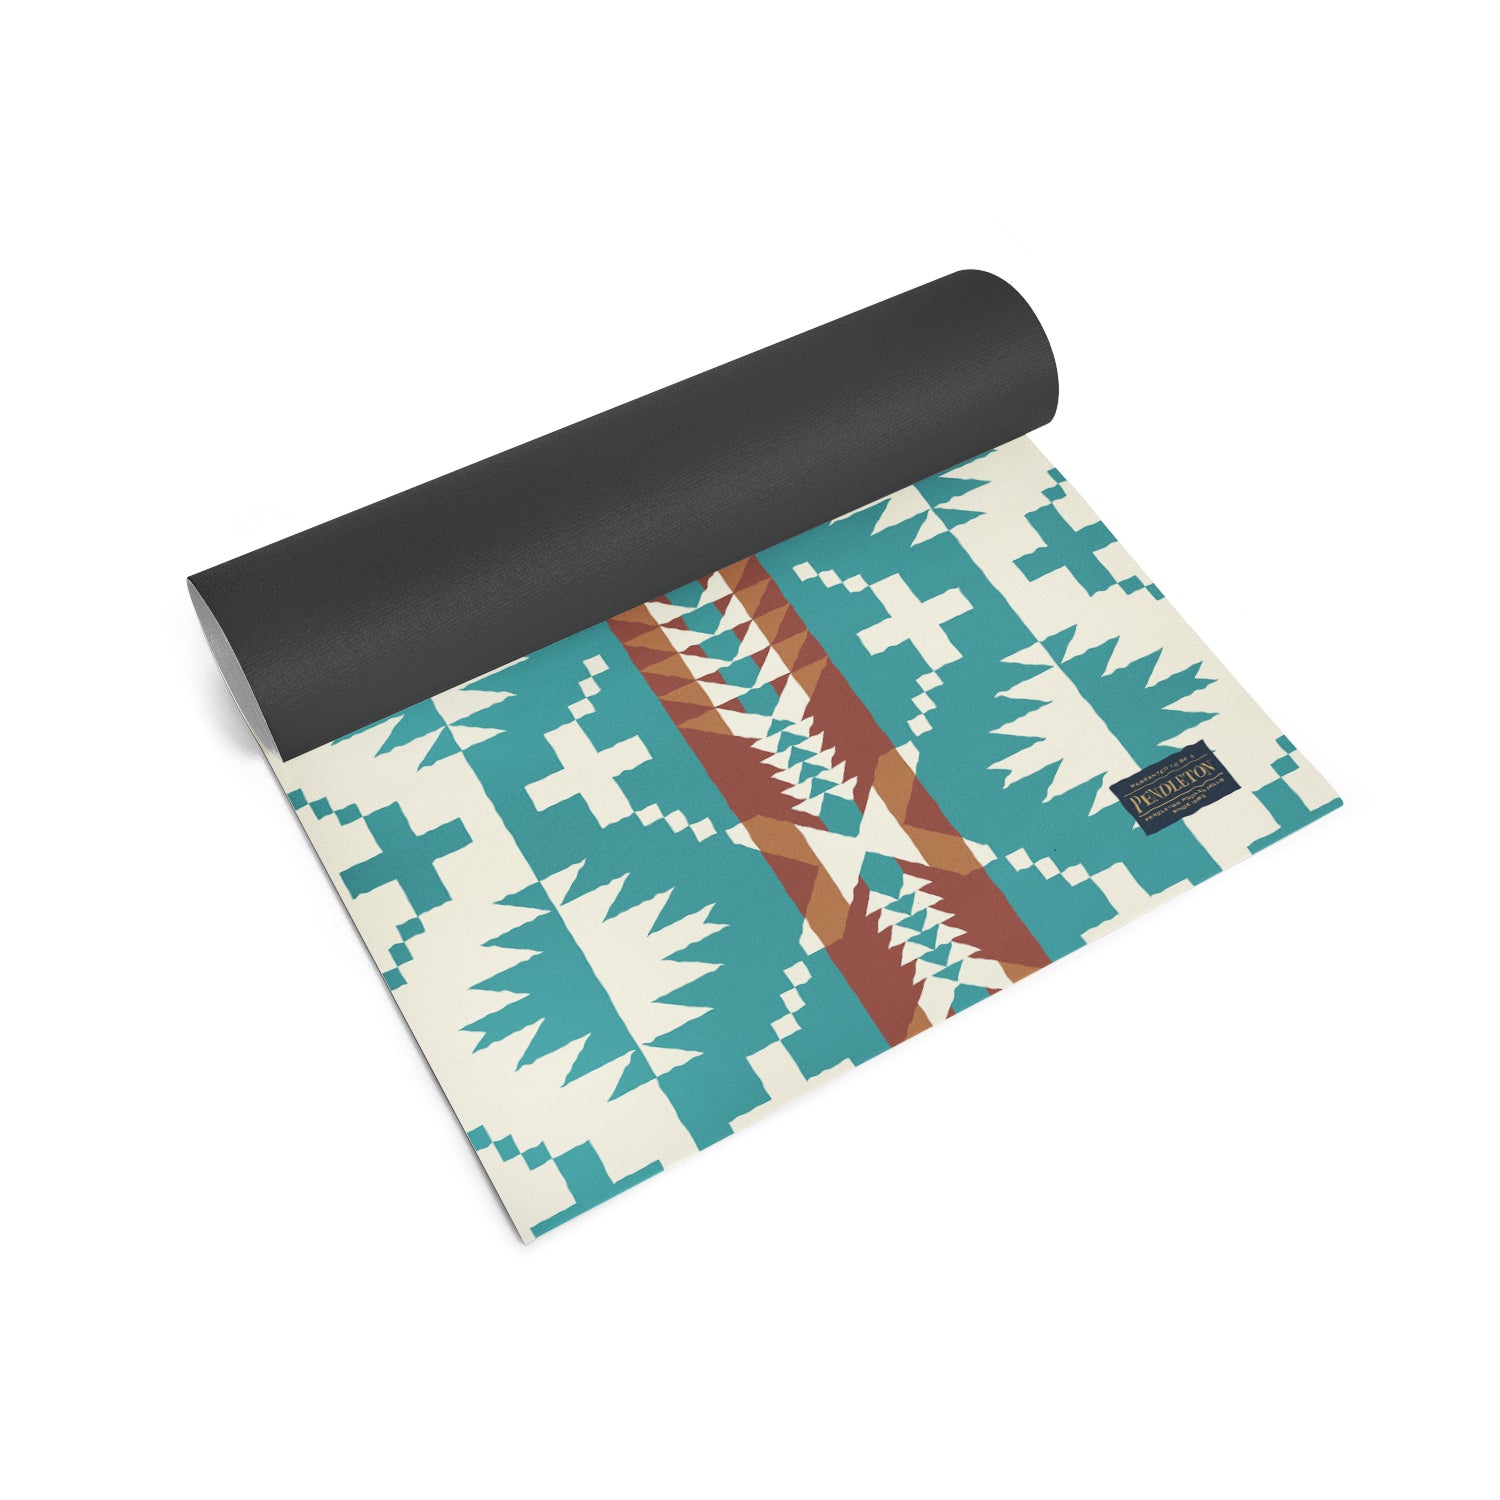 Yune 6mm Thick Yoga Mat The Bowie